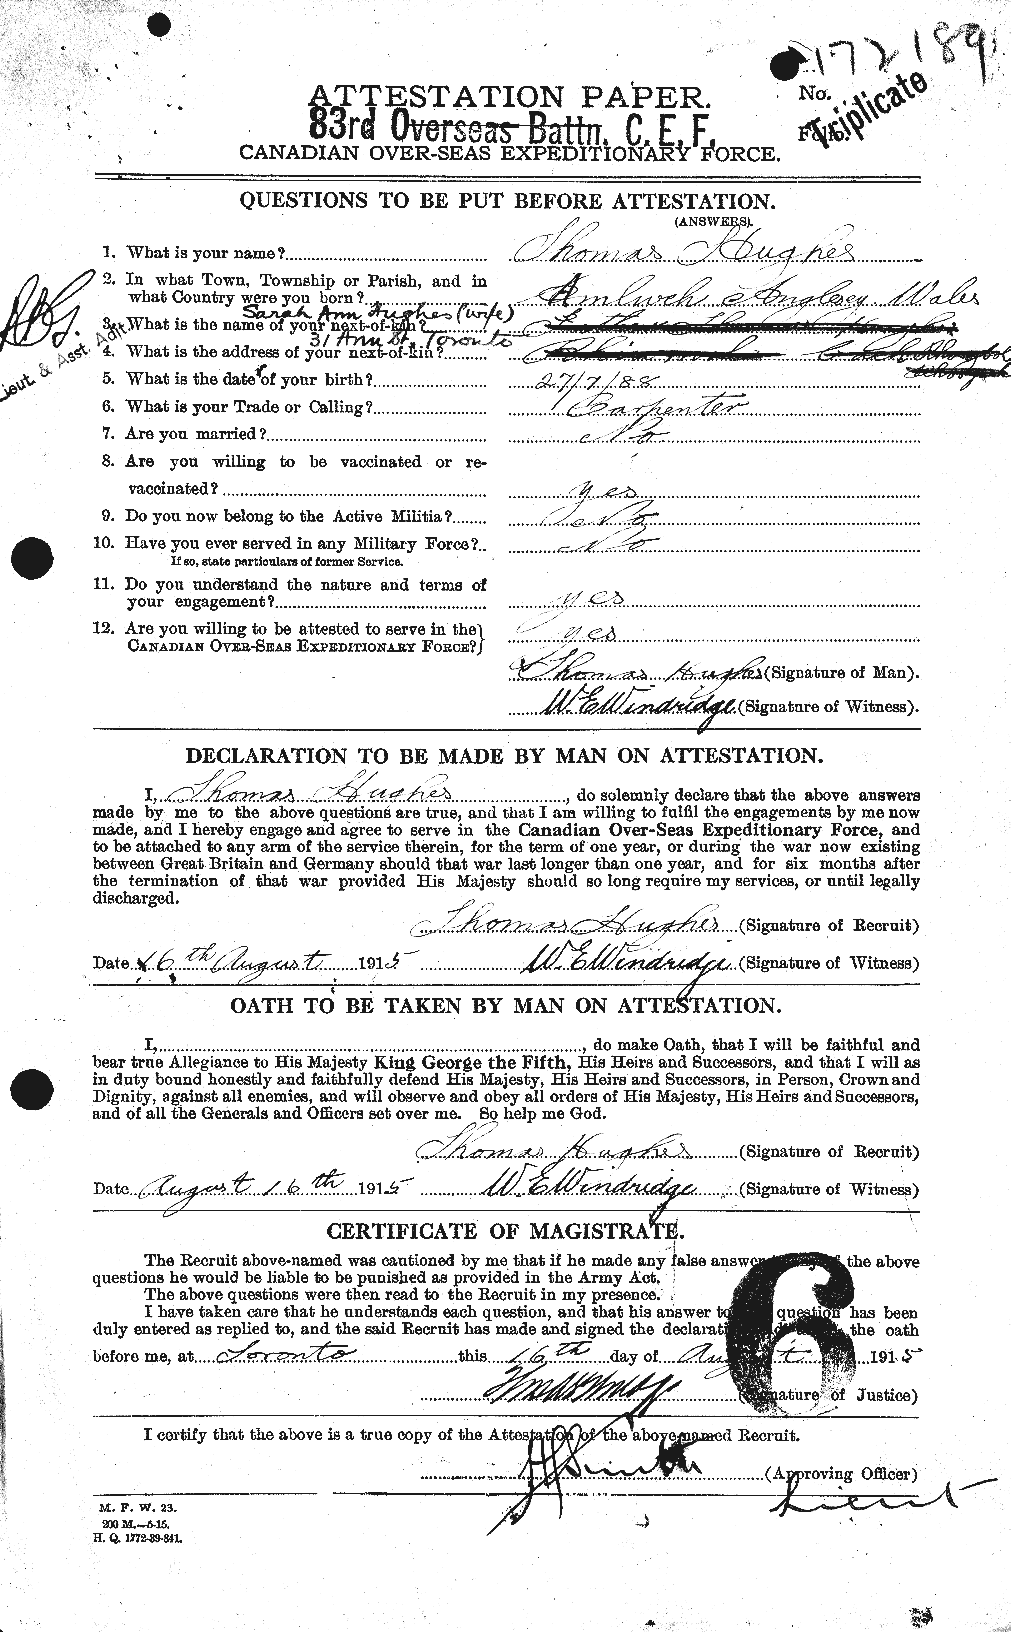 Personnel Records of the First World War - CEF 406670a